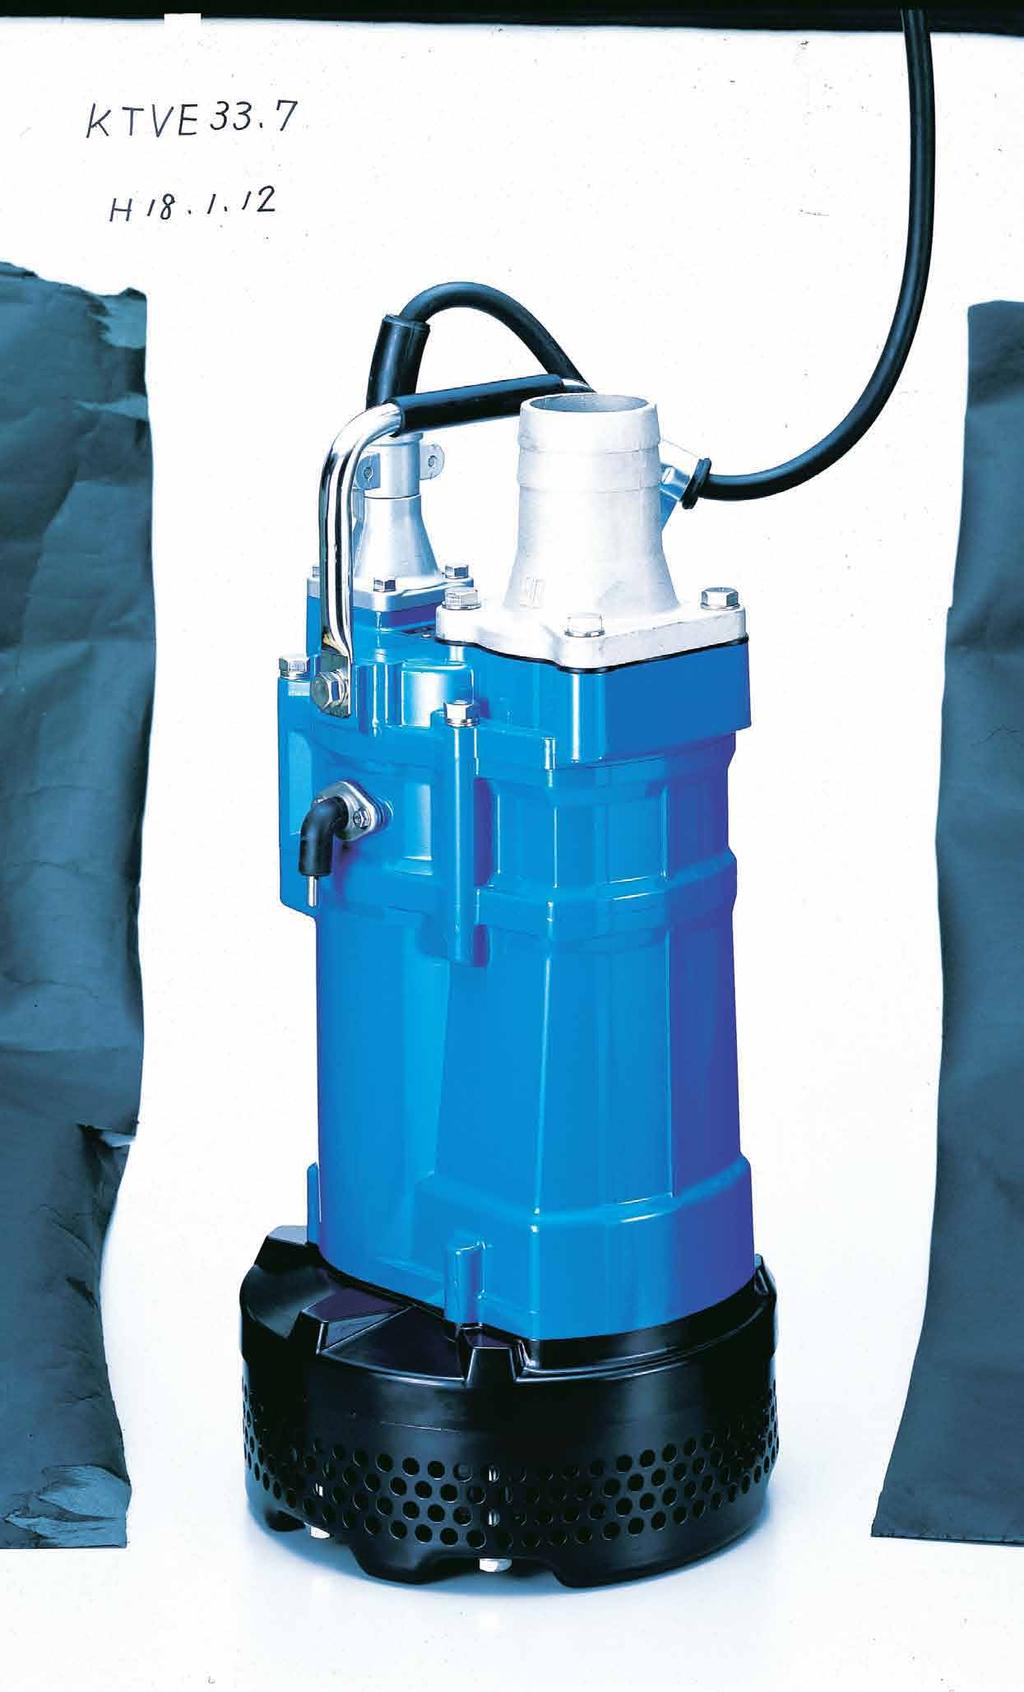 Top Discharge, Side Flow Design This design assures efficient motor cooling even if the pump runs with its motor exposed to air, and also allows the overall diameter of the pump to be reduced for